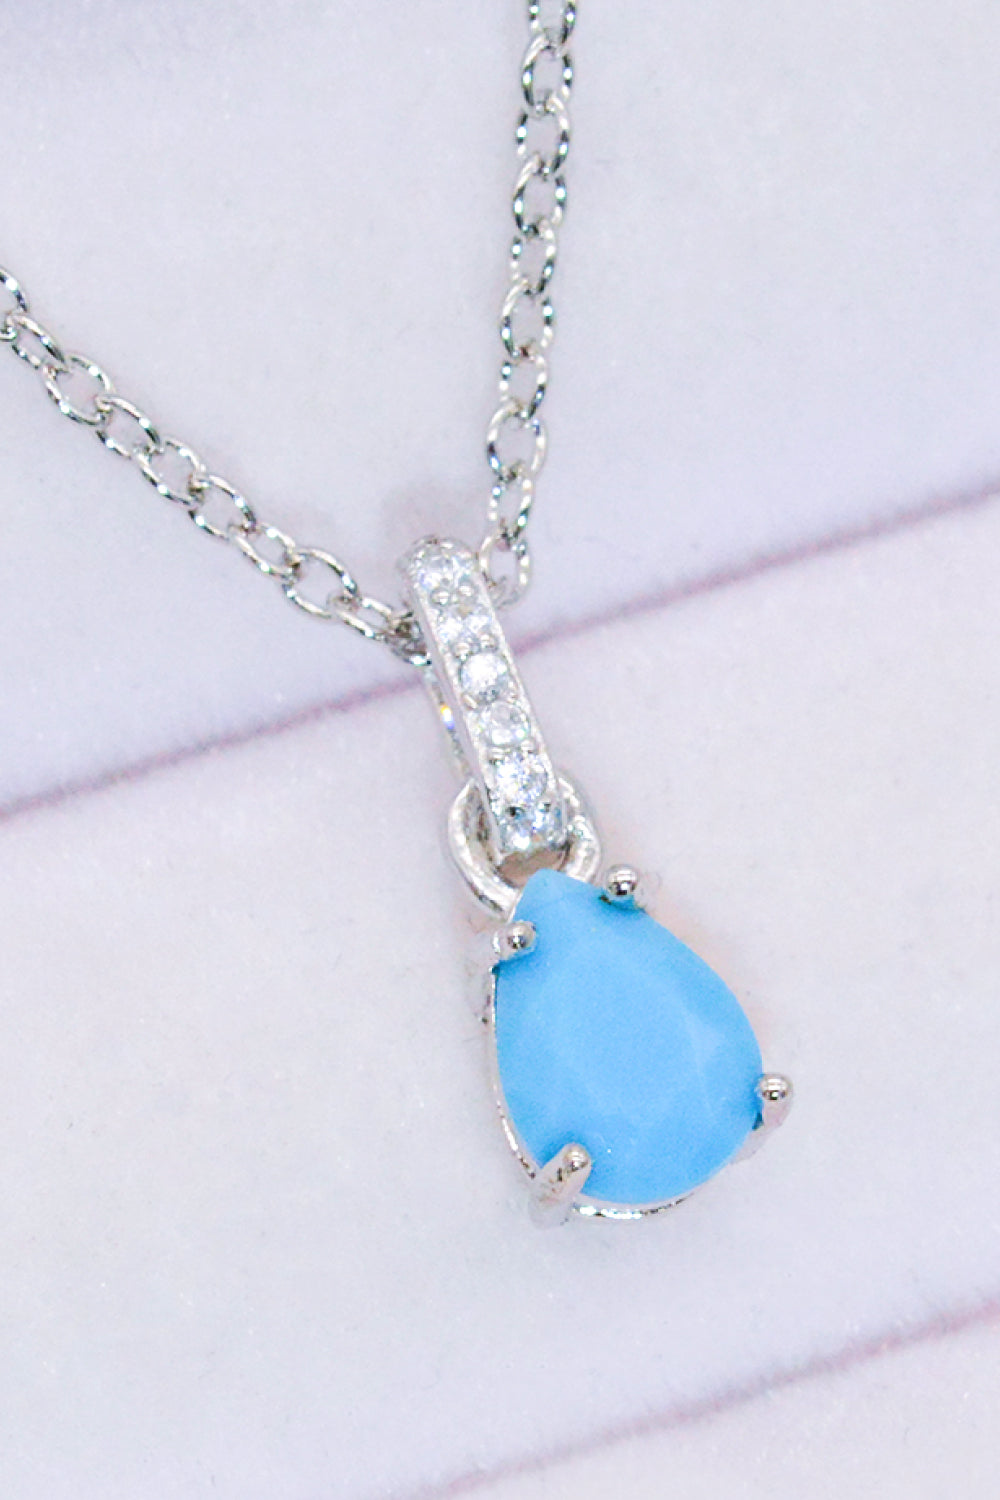 Jerry's Apparel Chain Necklaces Teardrop Turquoise 4-Prong Pendant Necklace